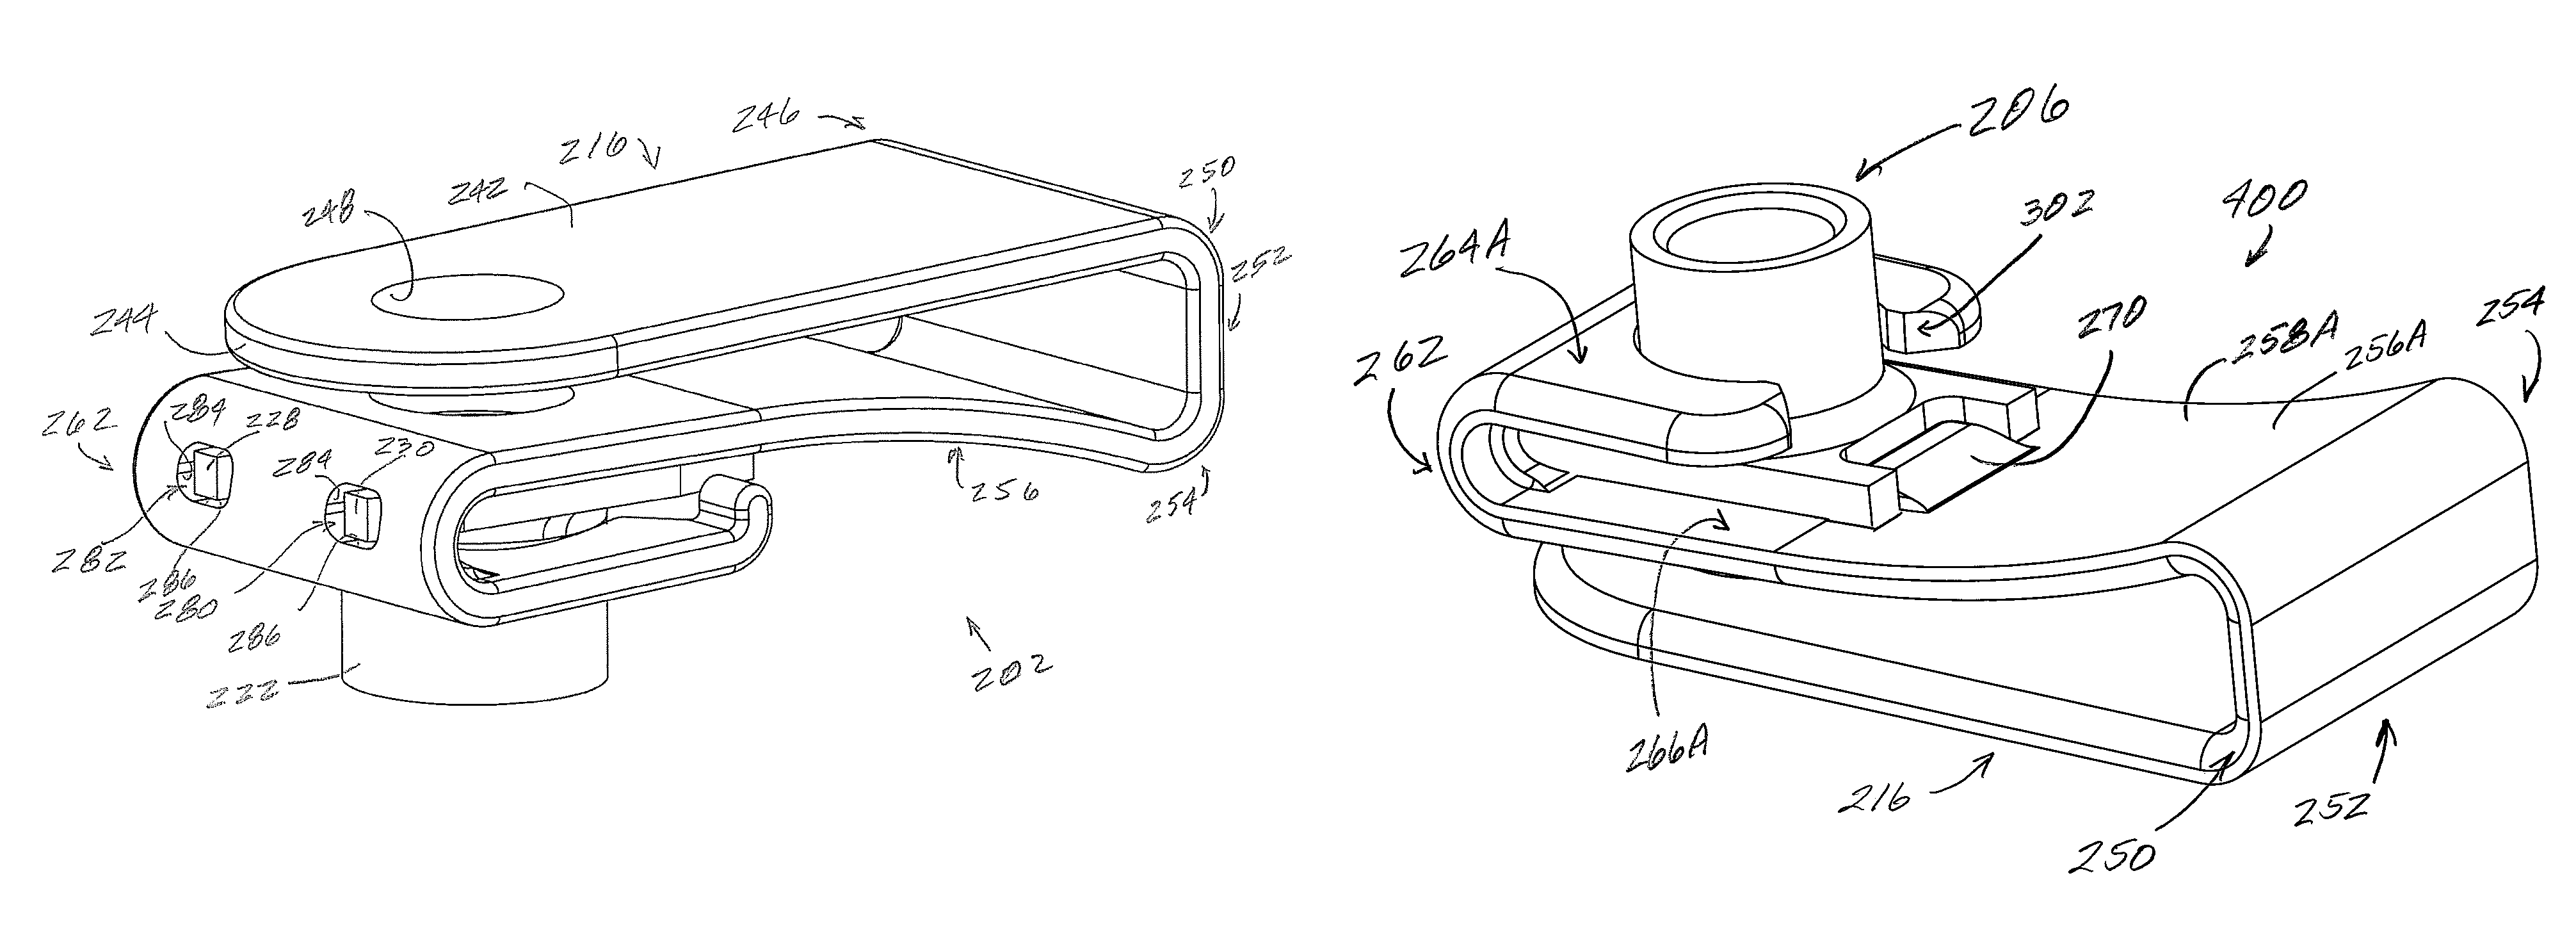 Apparatus and methods for fastening a panel or other components